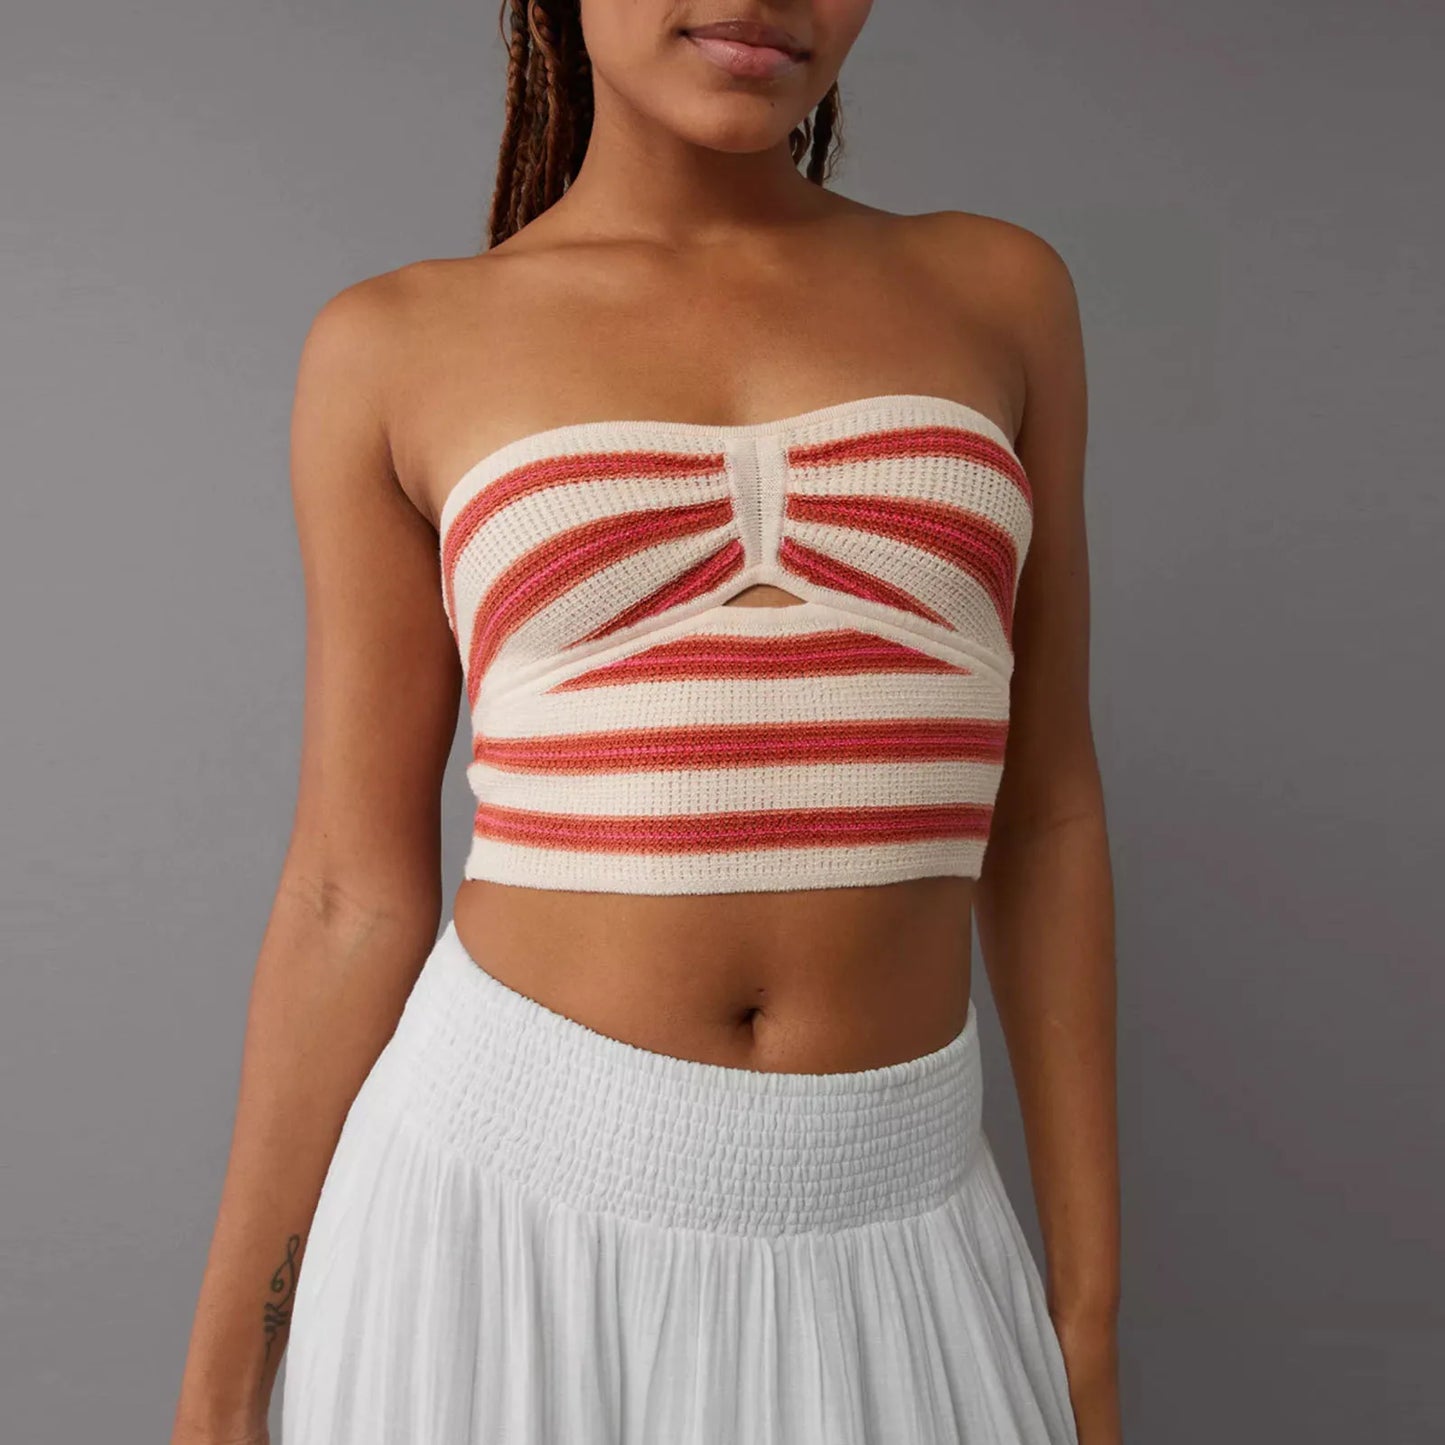 Strapless Tops- Women's Knitting Strapless Tube Knot-Bust Crop Top- Red Apricot Stripe- Chuzko Women Clothing